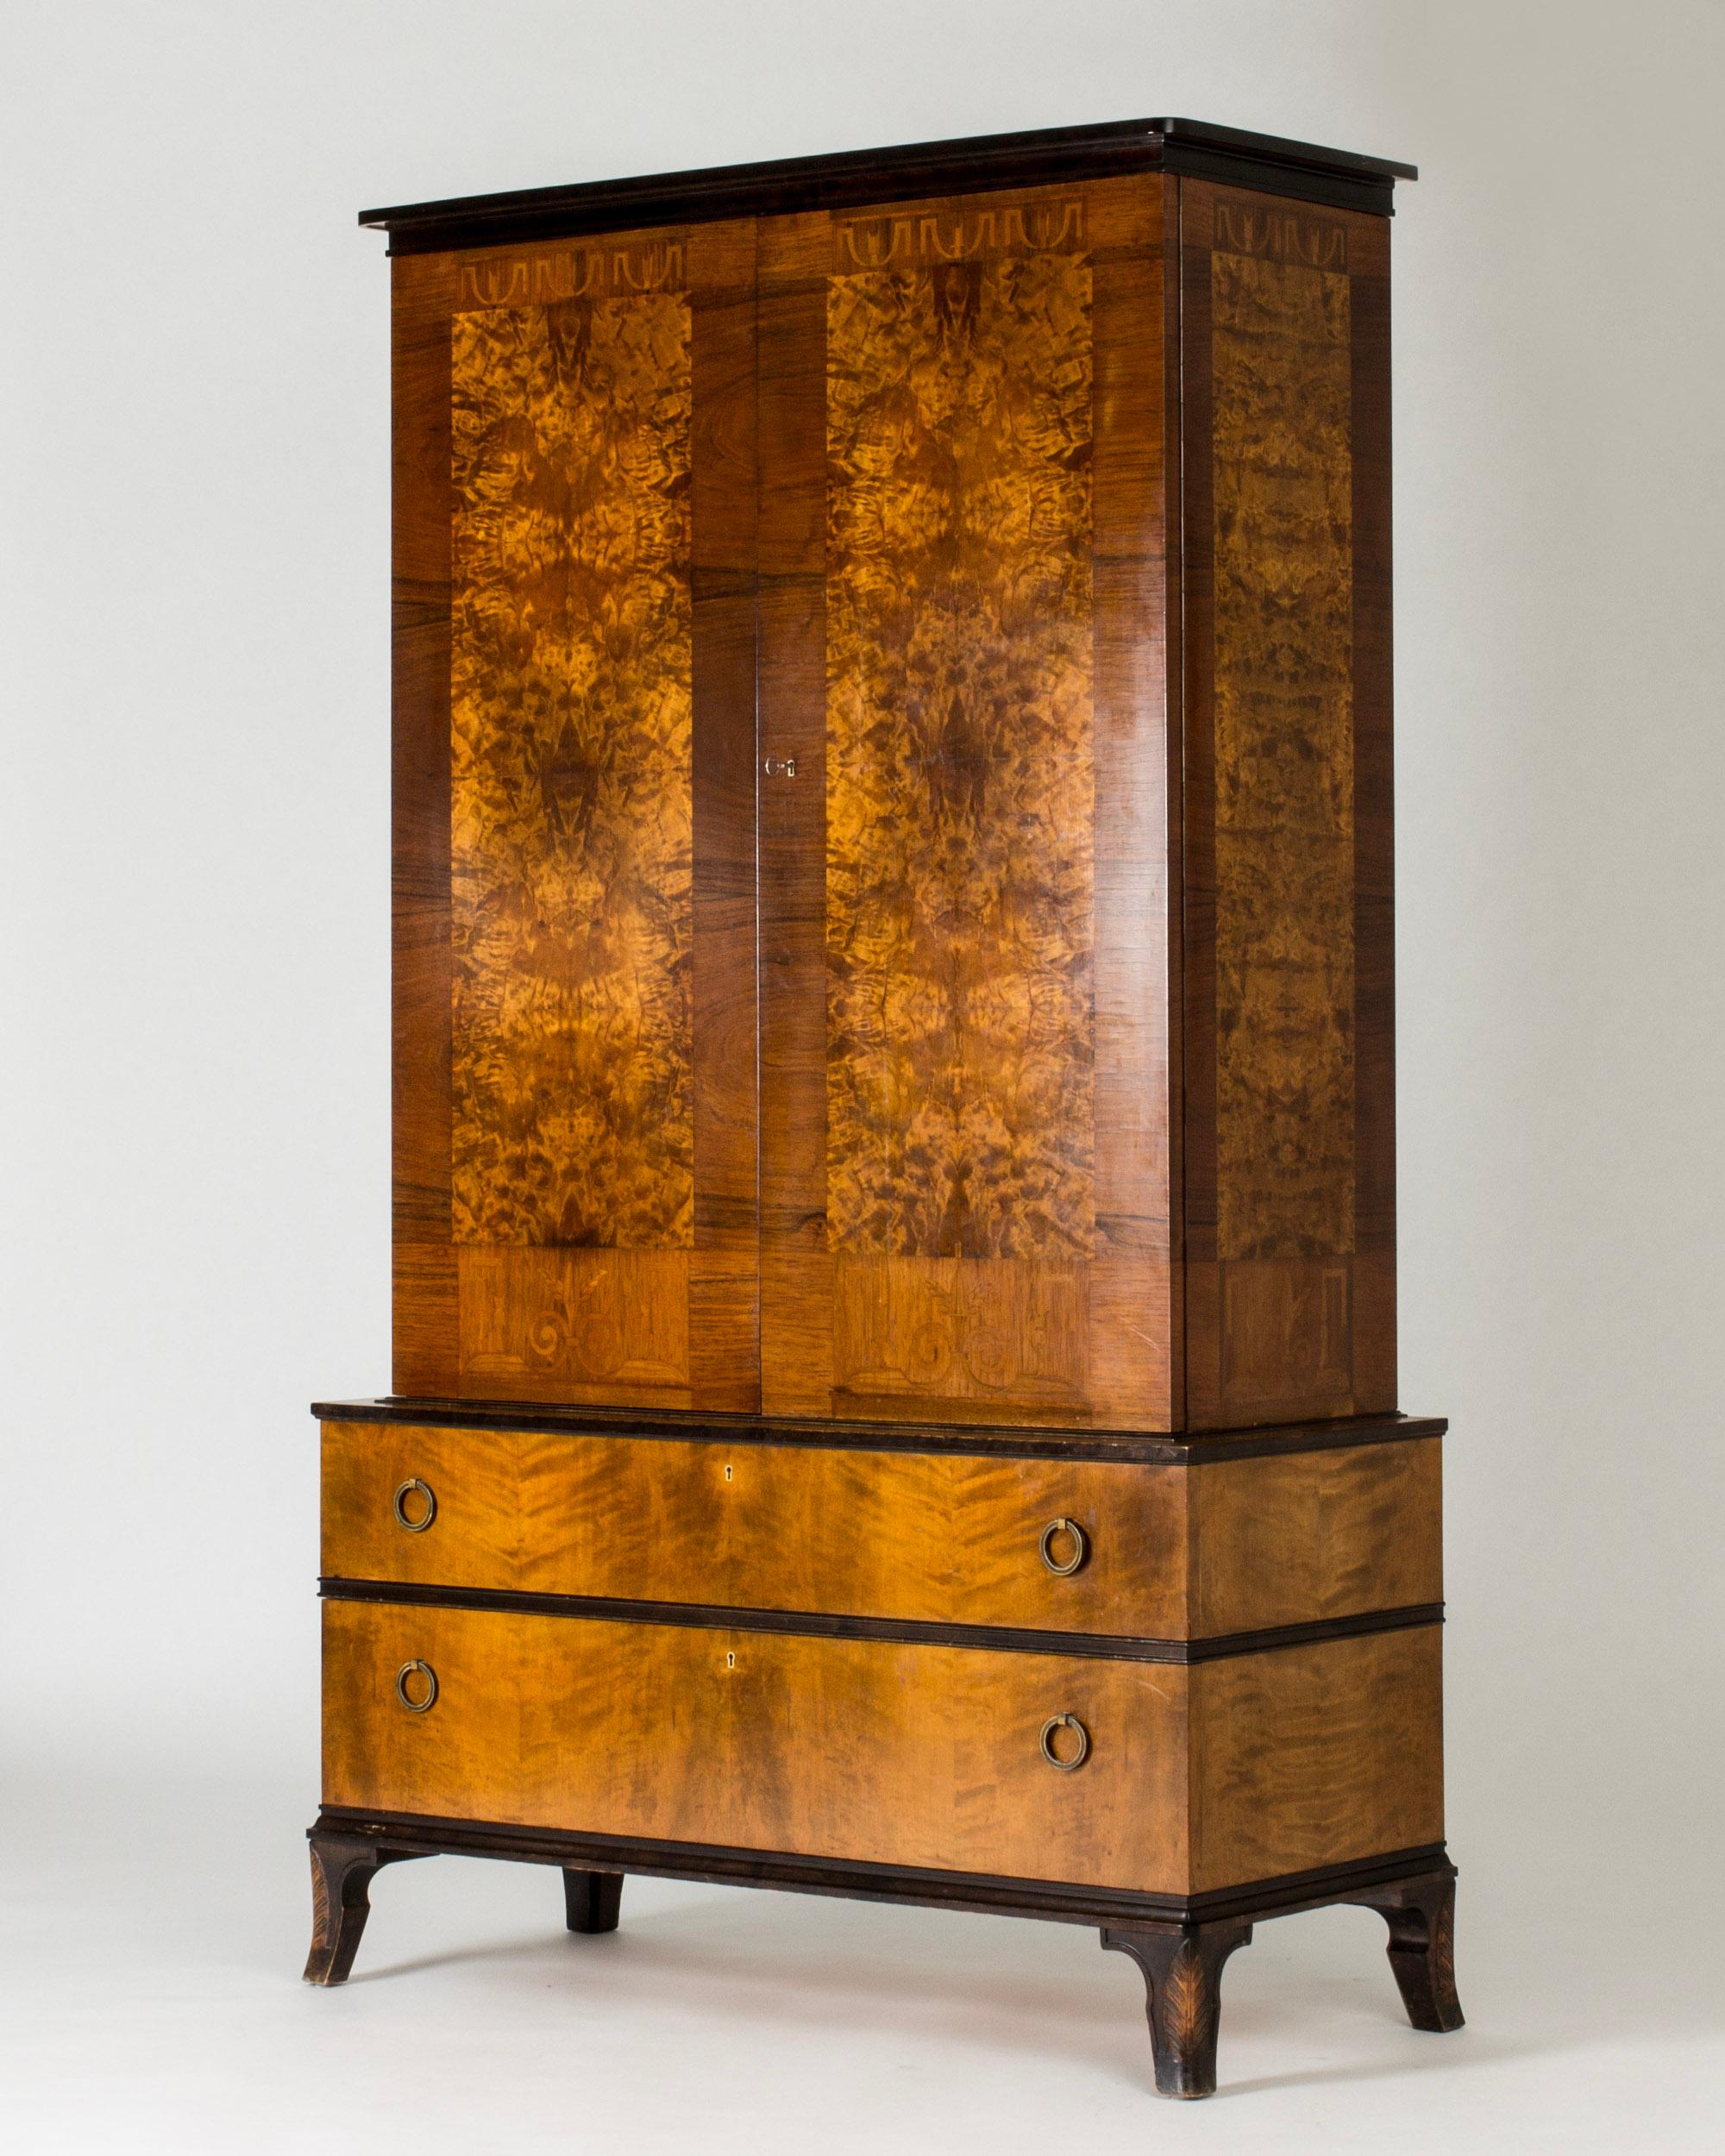 Elegant mahogany cabinet by Erik Chambert, with drawers in the wider bottom part. Dramatic root veneer on the cabinet doors, decor of intarsia. Round brass handles. Legs with carved pattern of feathers.